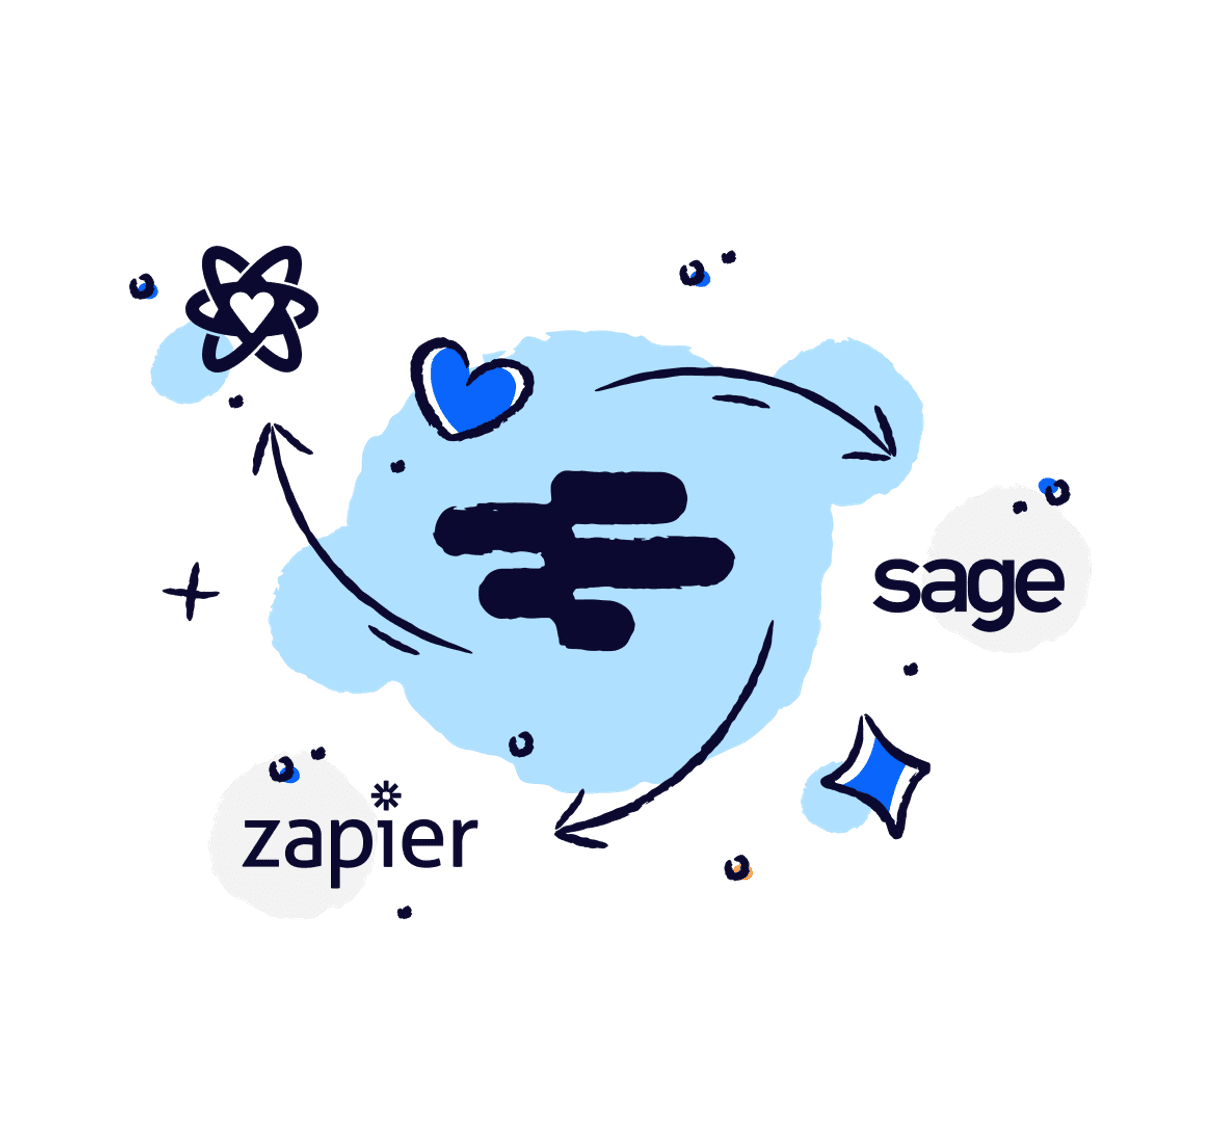 Black RotaCloud logo surrounded by circling stars, arrows, and logos for Sage and Zapier.